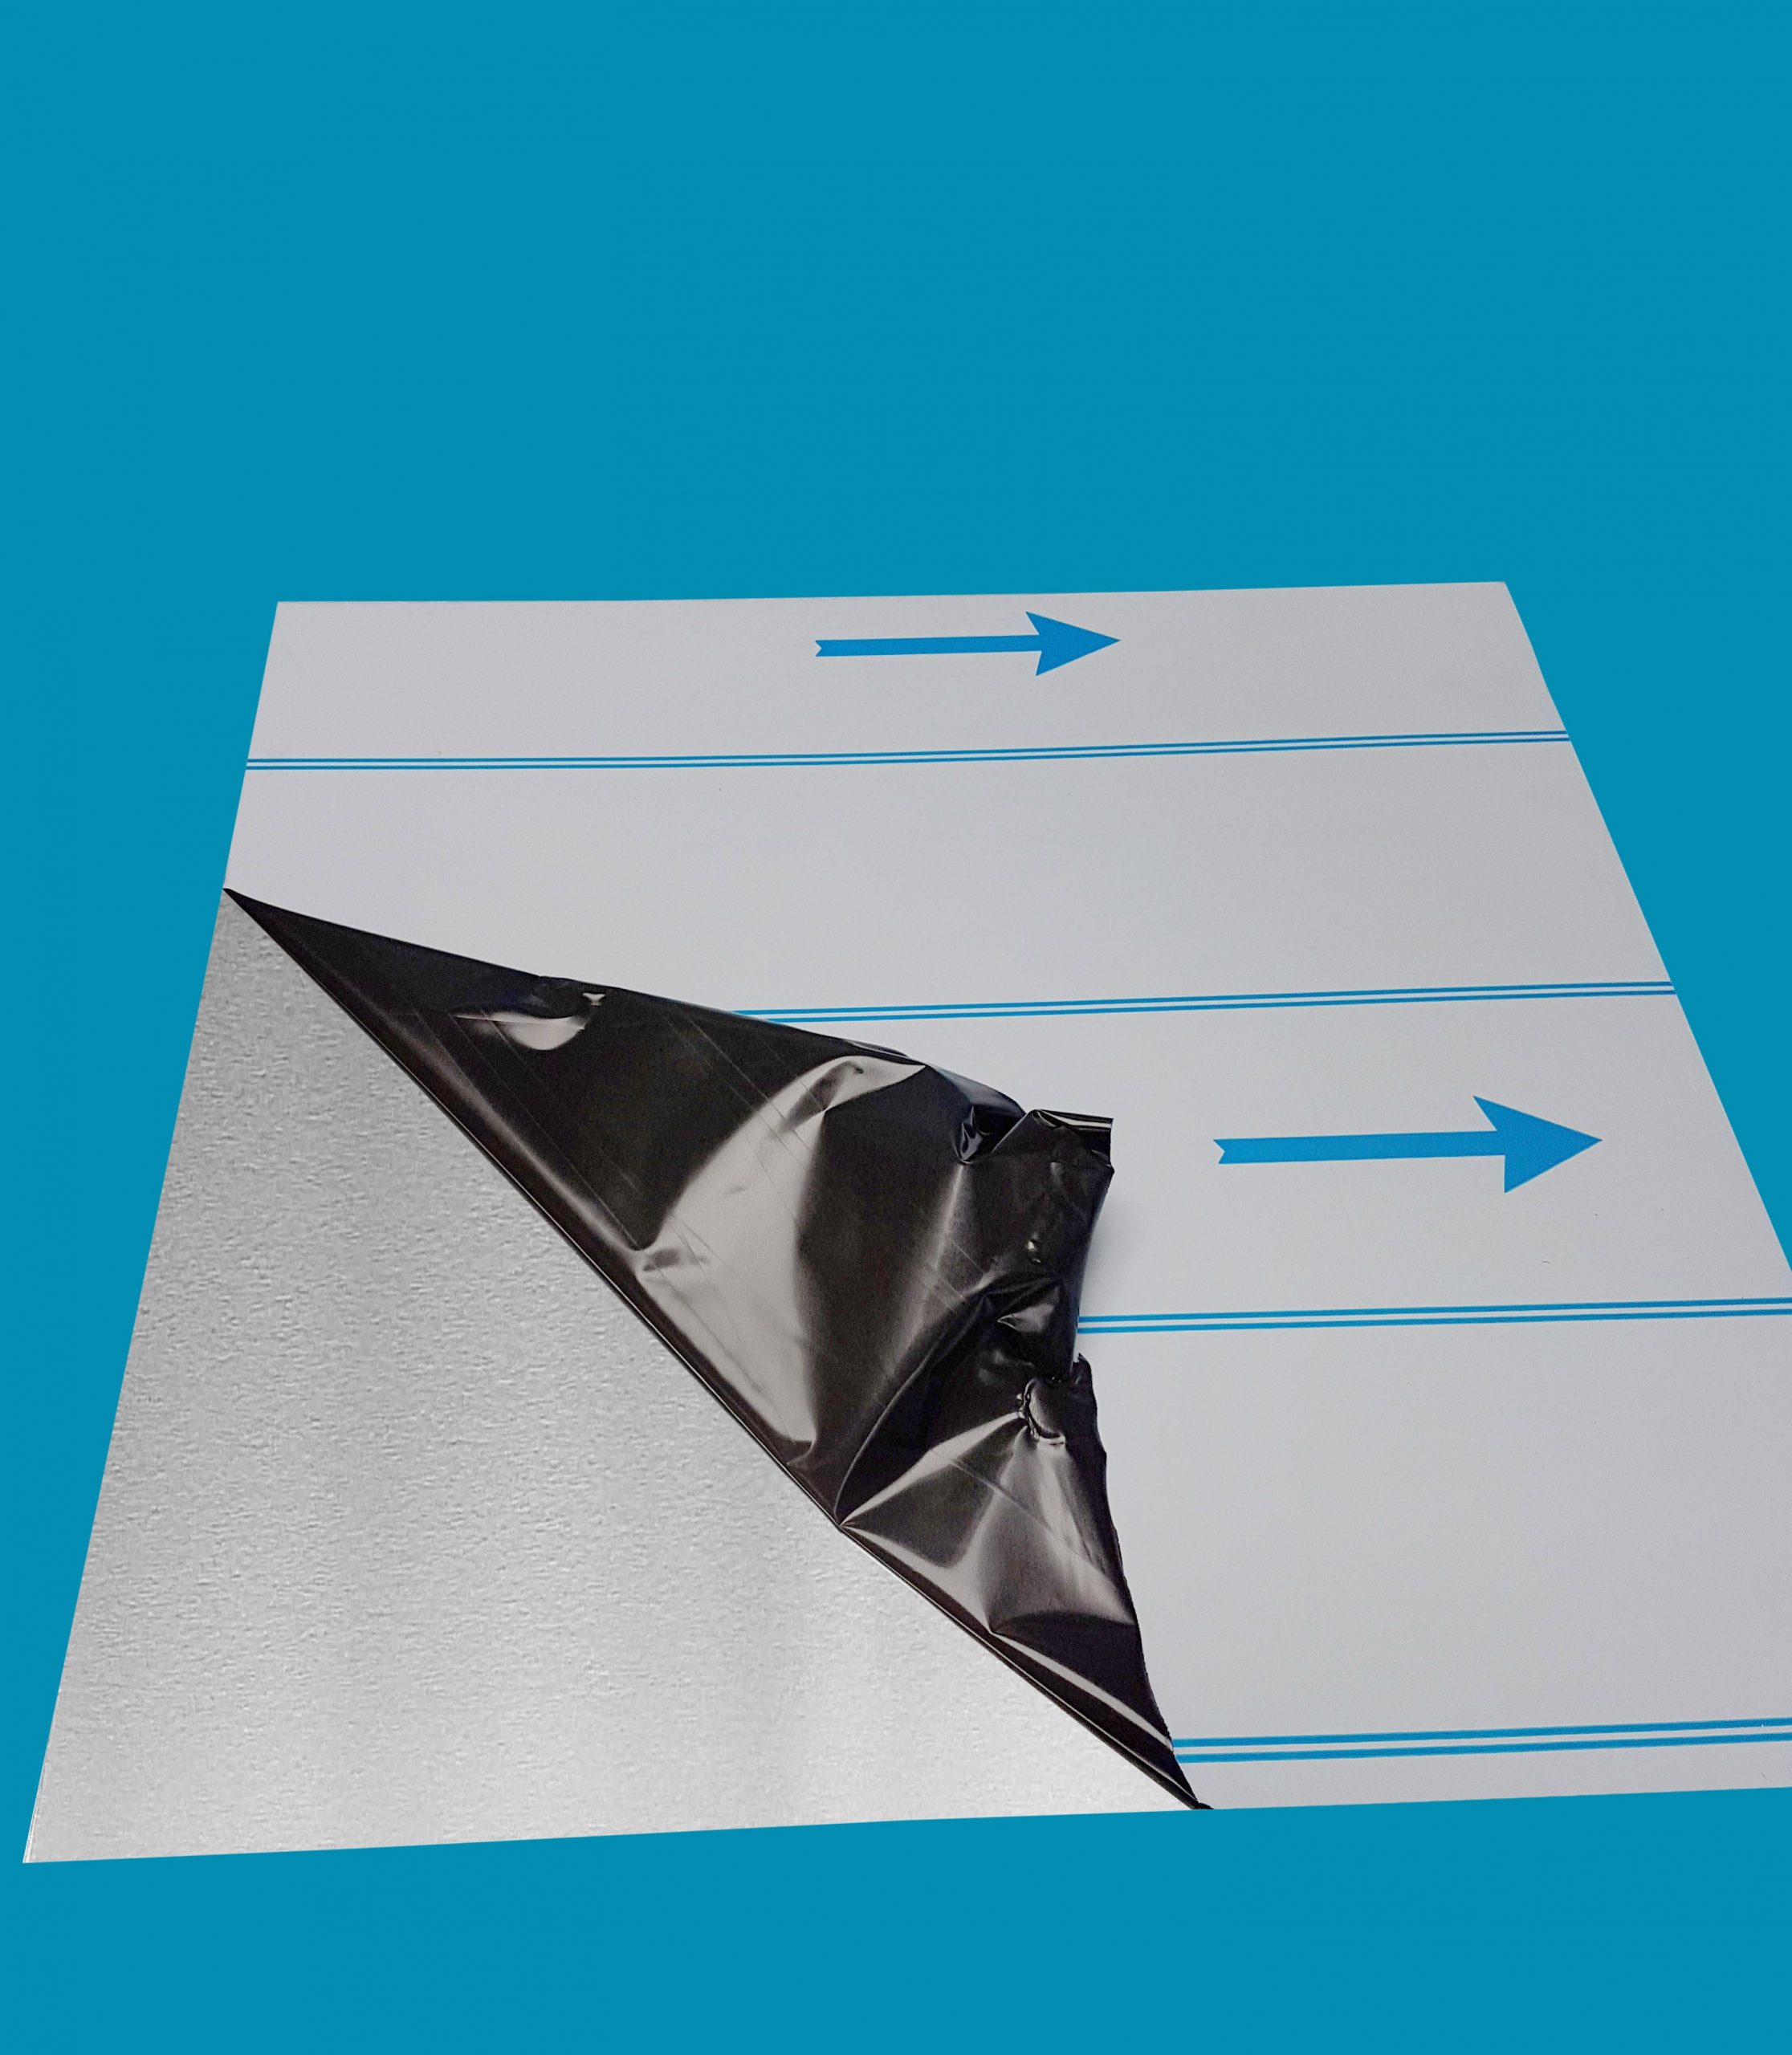 aluminium sheet 1mm poly coated protection to both faces 125mm x 125mm x 1mm Various sizes 